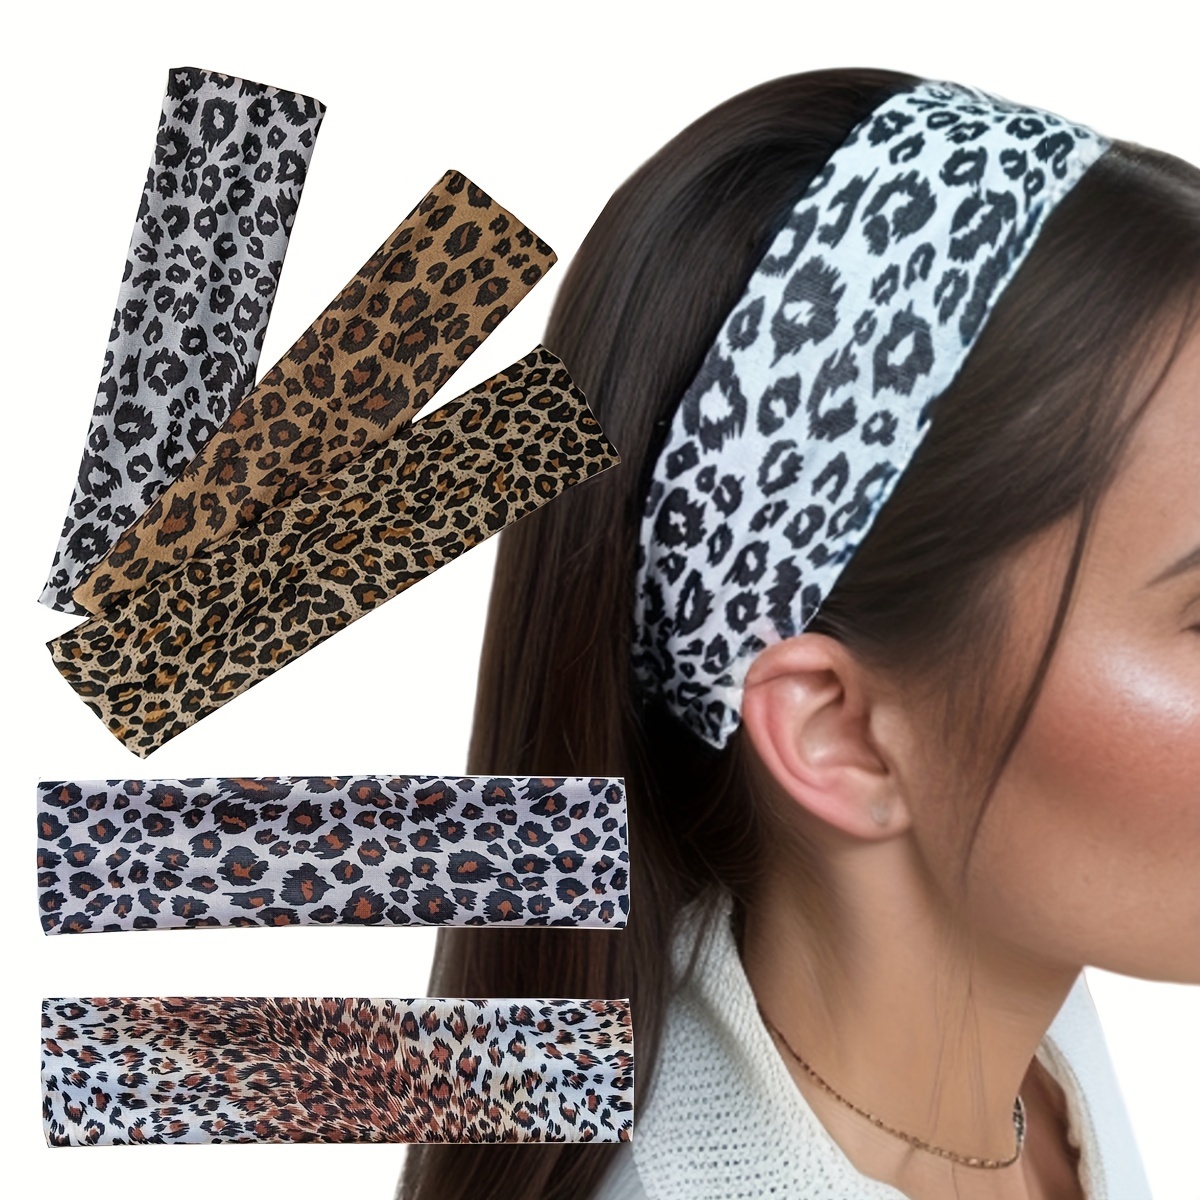 

Set Of 2 Leopard Print Headbands For Women - Cotton Blend Knotted Hairbands, Hip Hop Punk Style, Non-feathered Hair Accessories, Stretchy Fabric Head Wraps For Dress Up